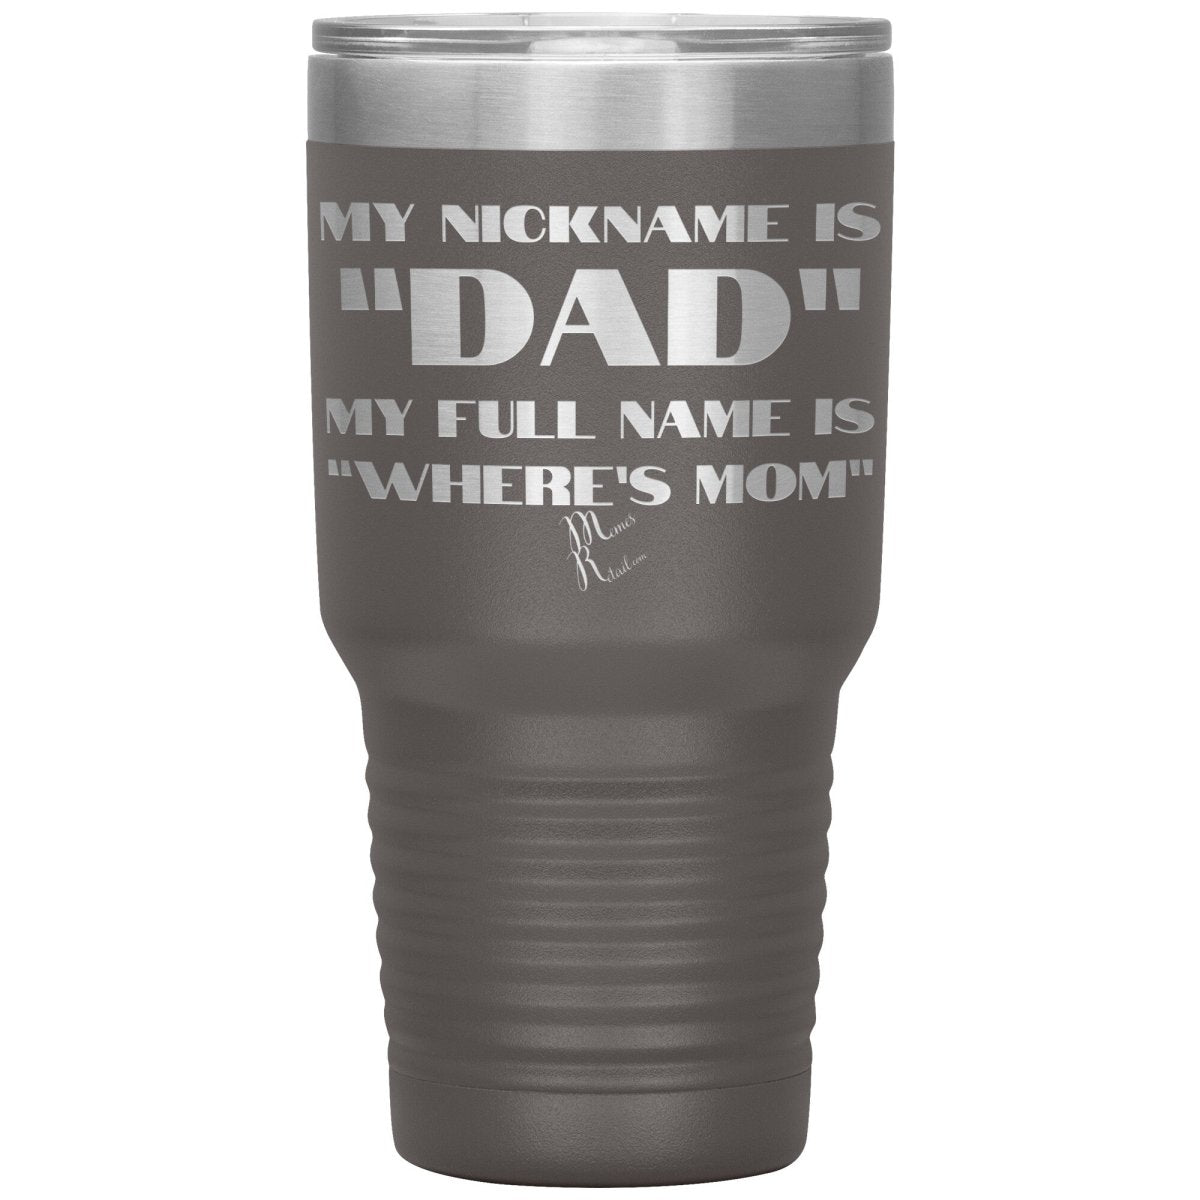 My Nickname is "Dad", My Full Name is "Where's Mom" Tumblers, 30oz Insulated Tumbler / Pewter - MemesRetail.com